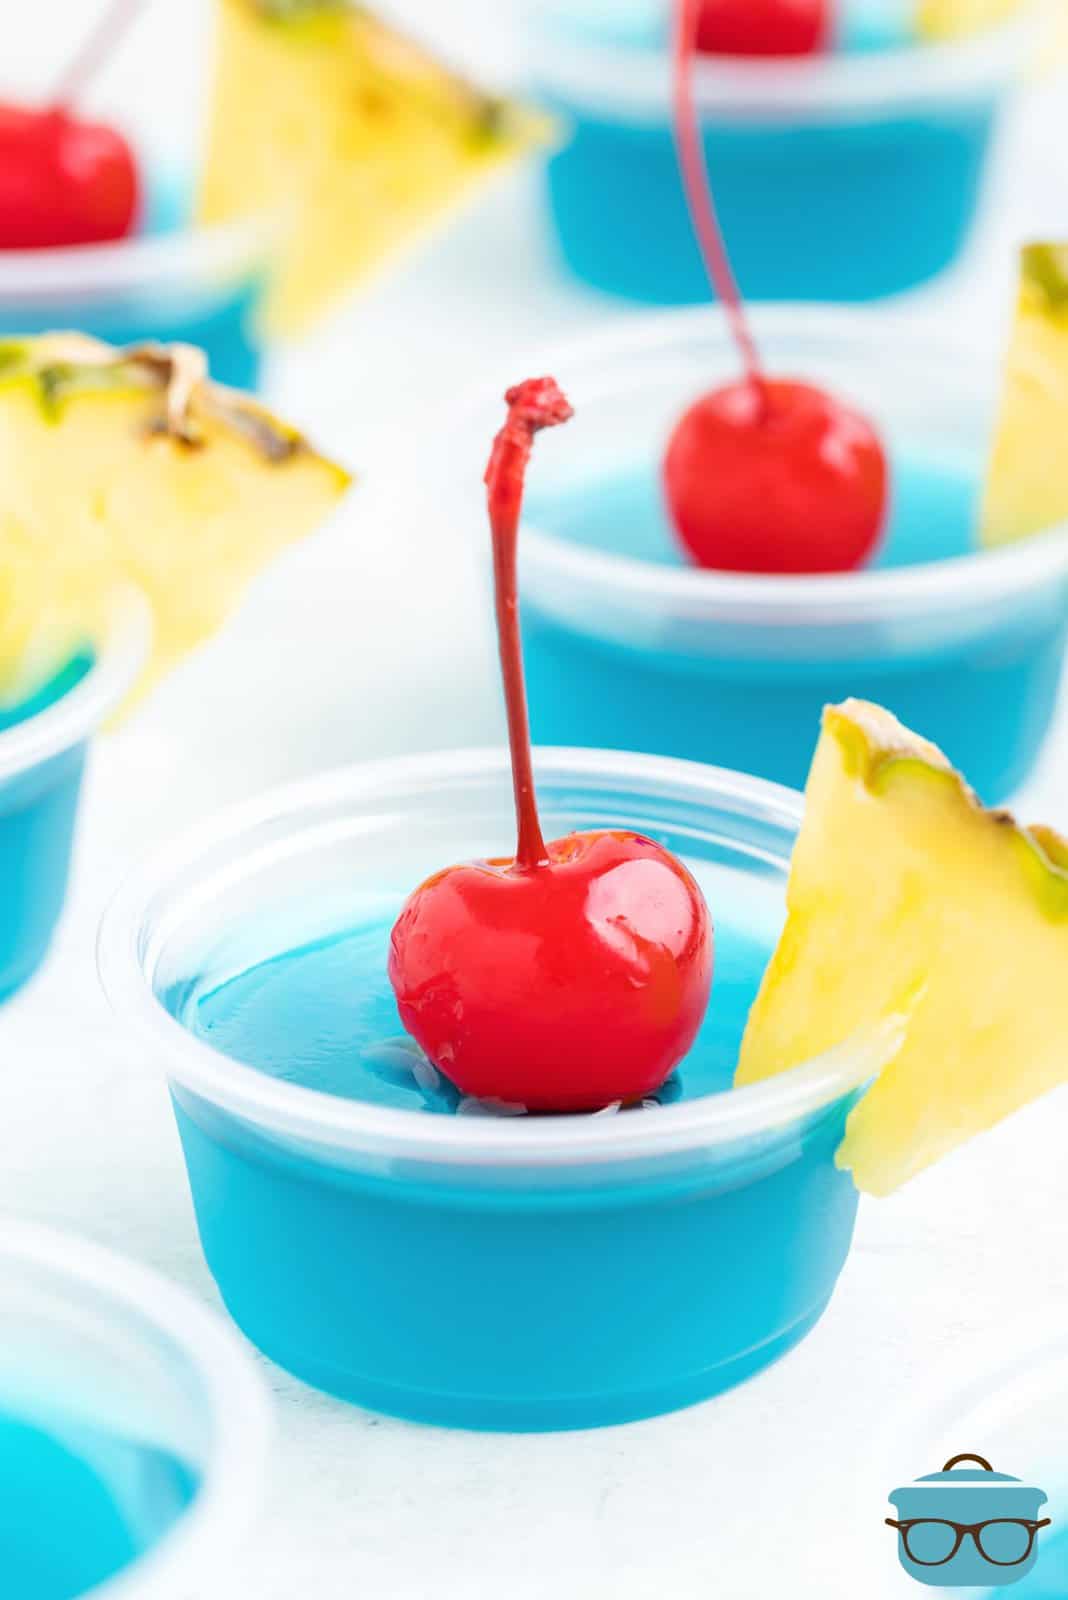 A few Blue Hawaii Jello Shots with cherries and pineapple garnishes.